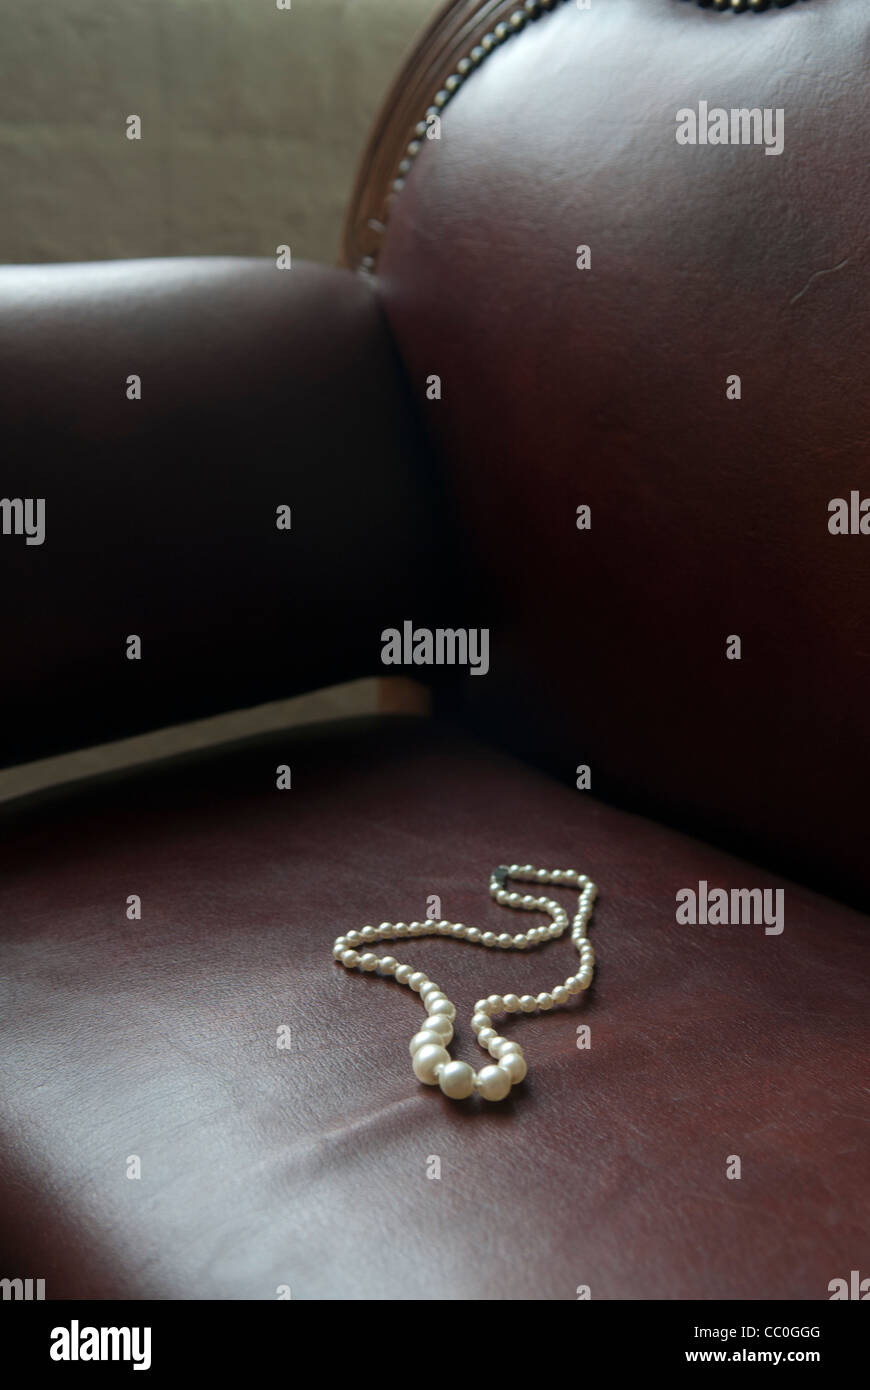 Pearls necklace abandoned on sofa Stock Photo